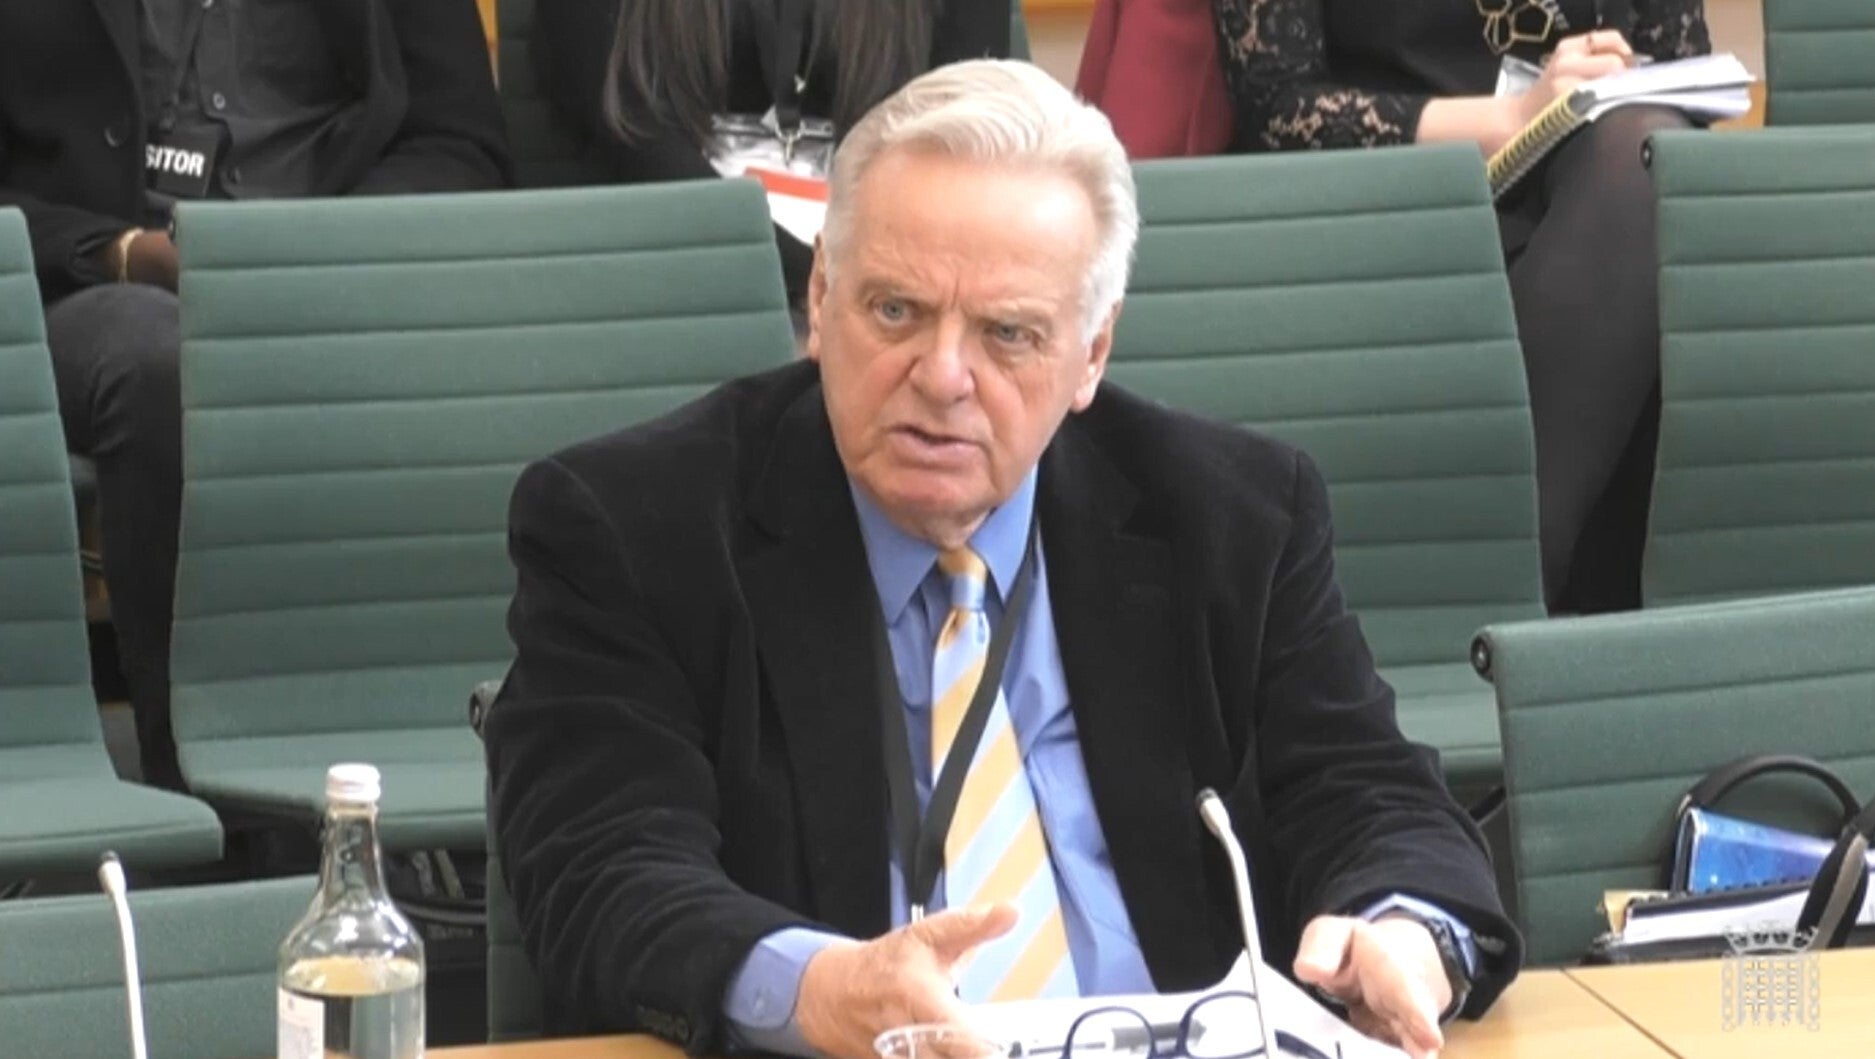 Lord Grade appearing before the DCMS Committee (House of Commons/PA)